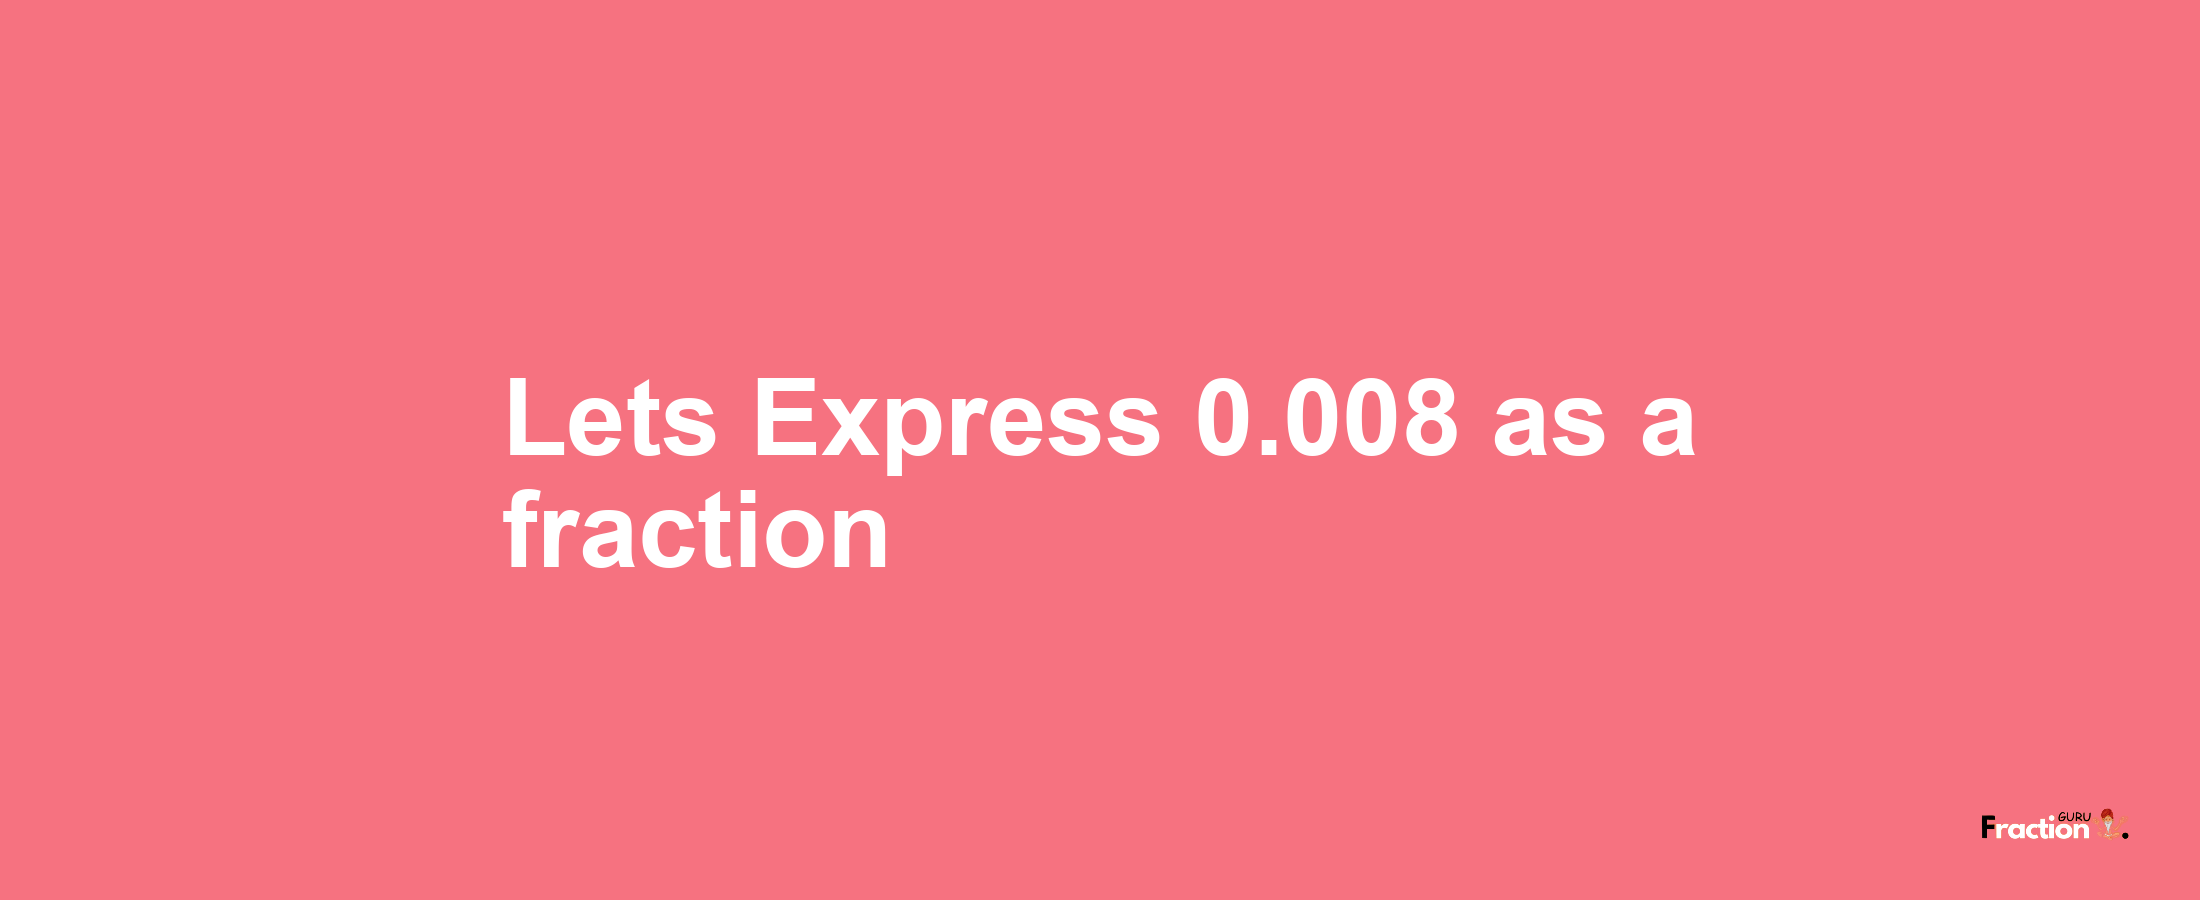 Lets Express 0.008 as afraction